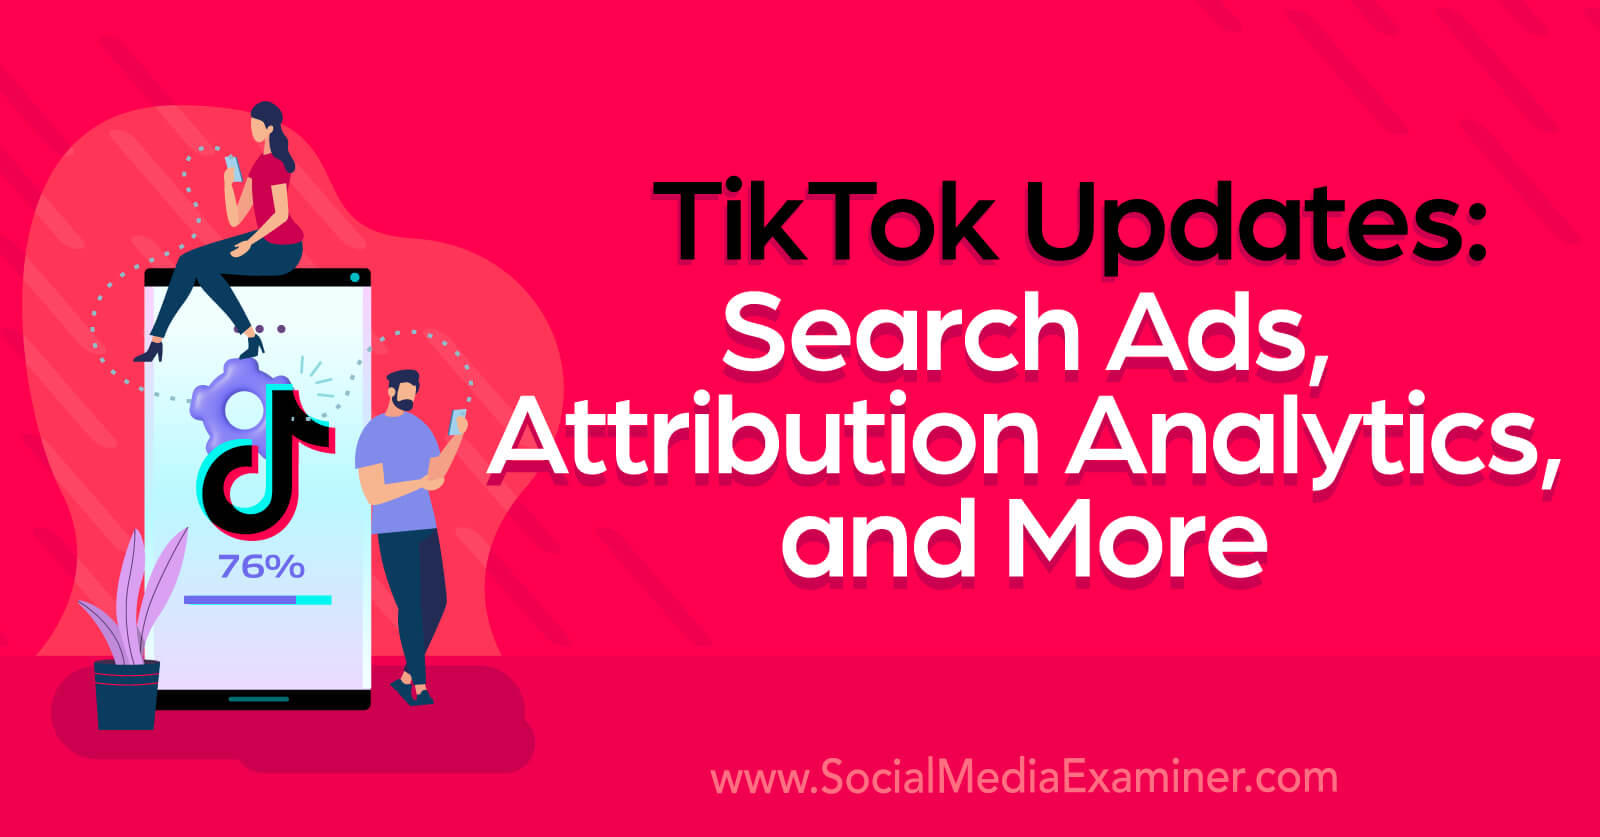 TikTok Updates: Changes That Affect Marketers by Social Media Examiner